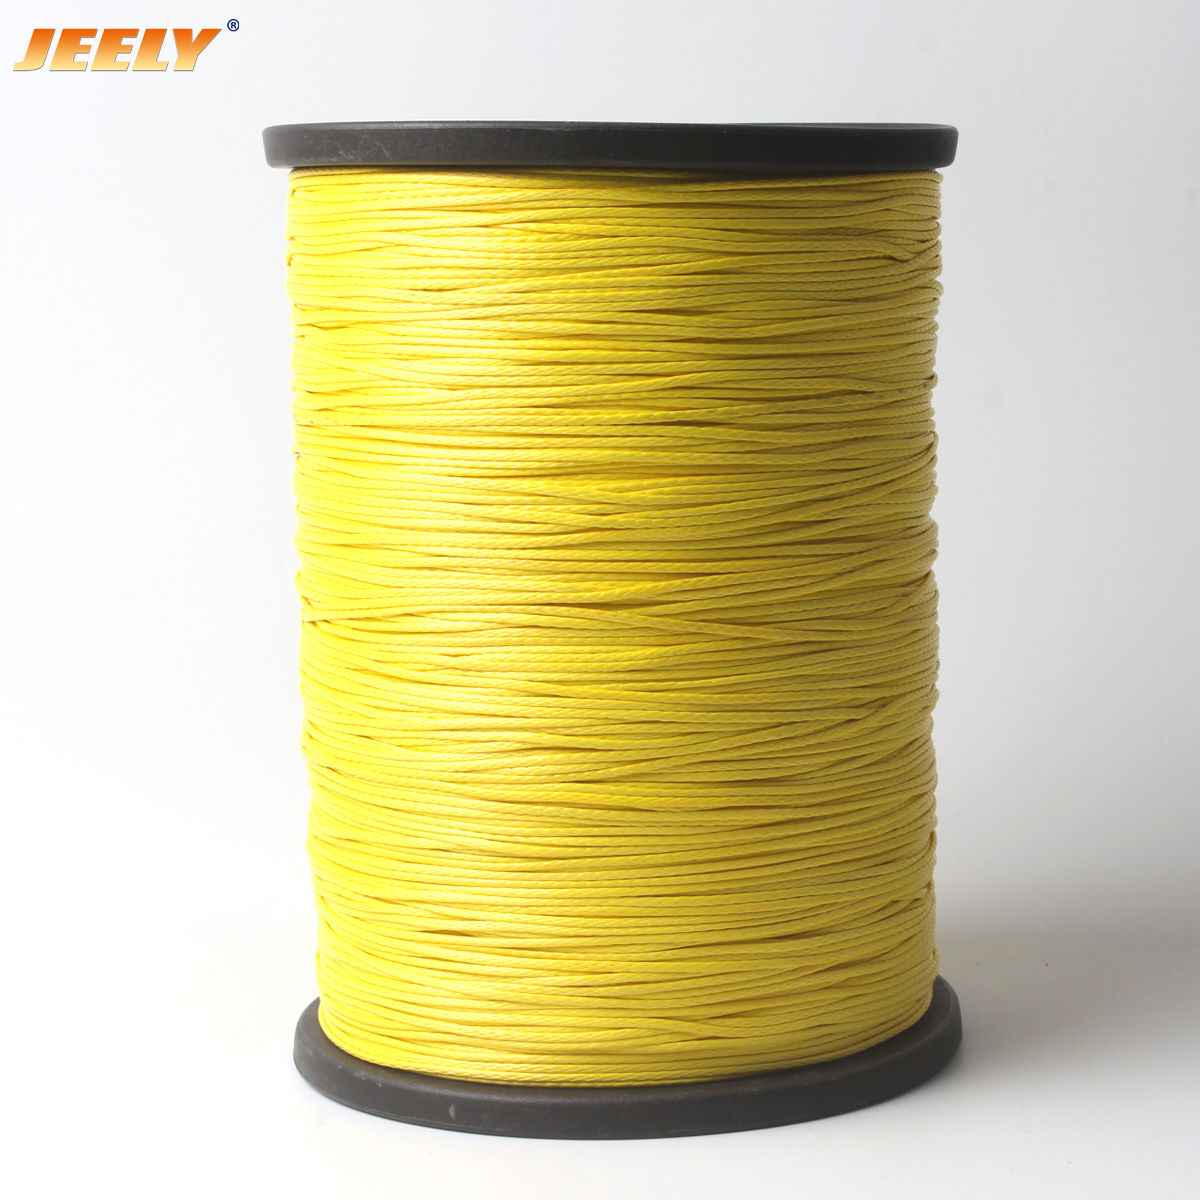 2mm UHMWPE hollow braided rope for hammock whoopie sling